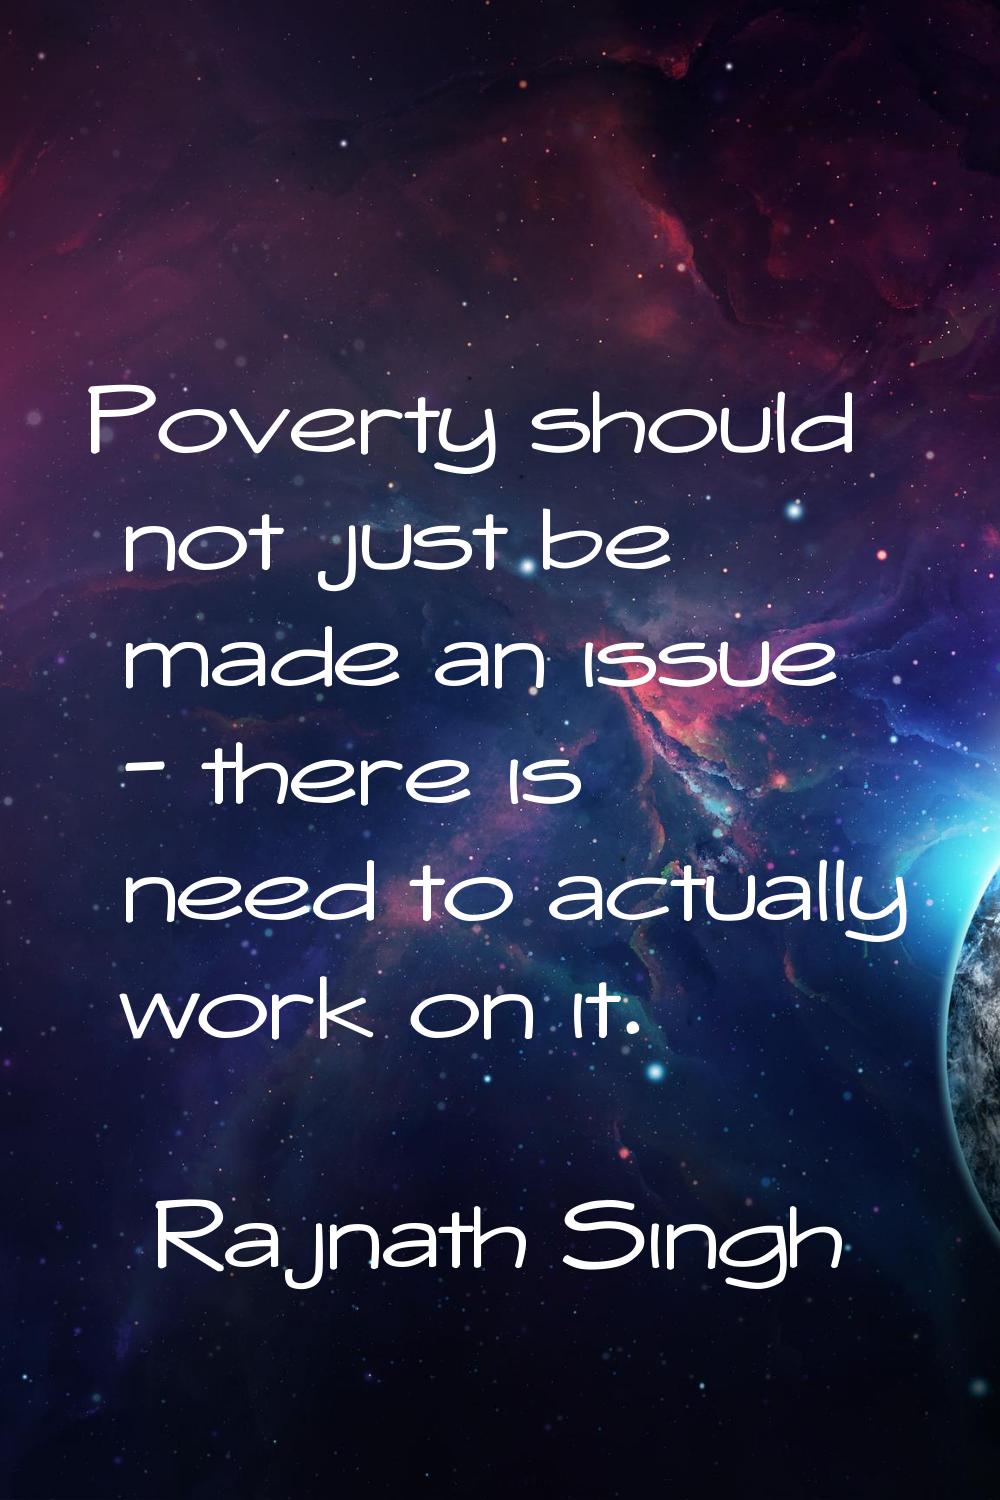 Poverty should not just be made an issue - there is need to actually work on it.